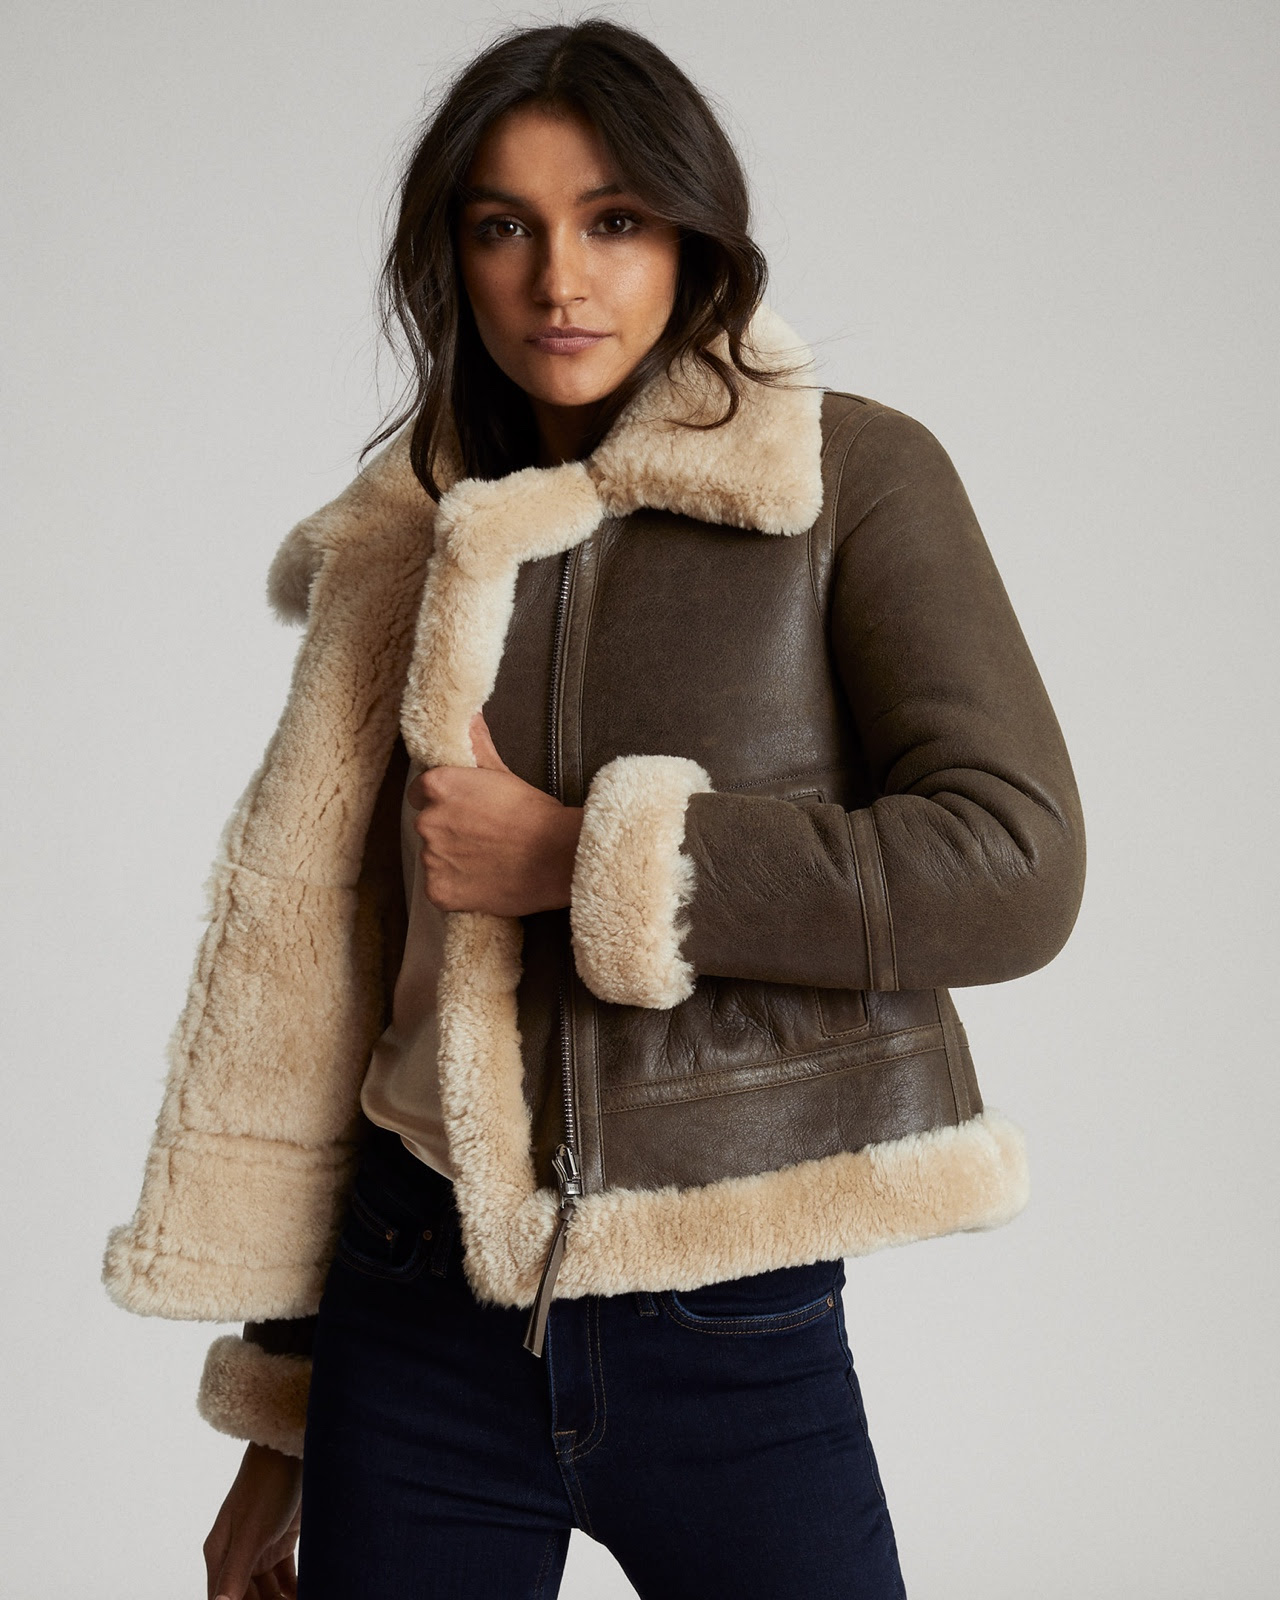 REISS - The Reversible Shearling Jacket - Pynck